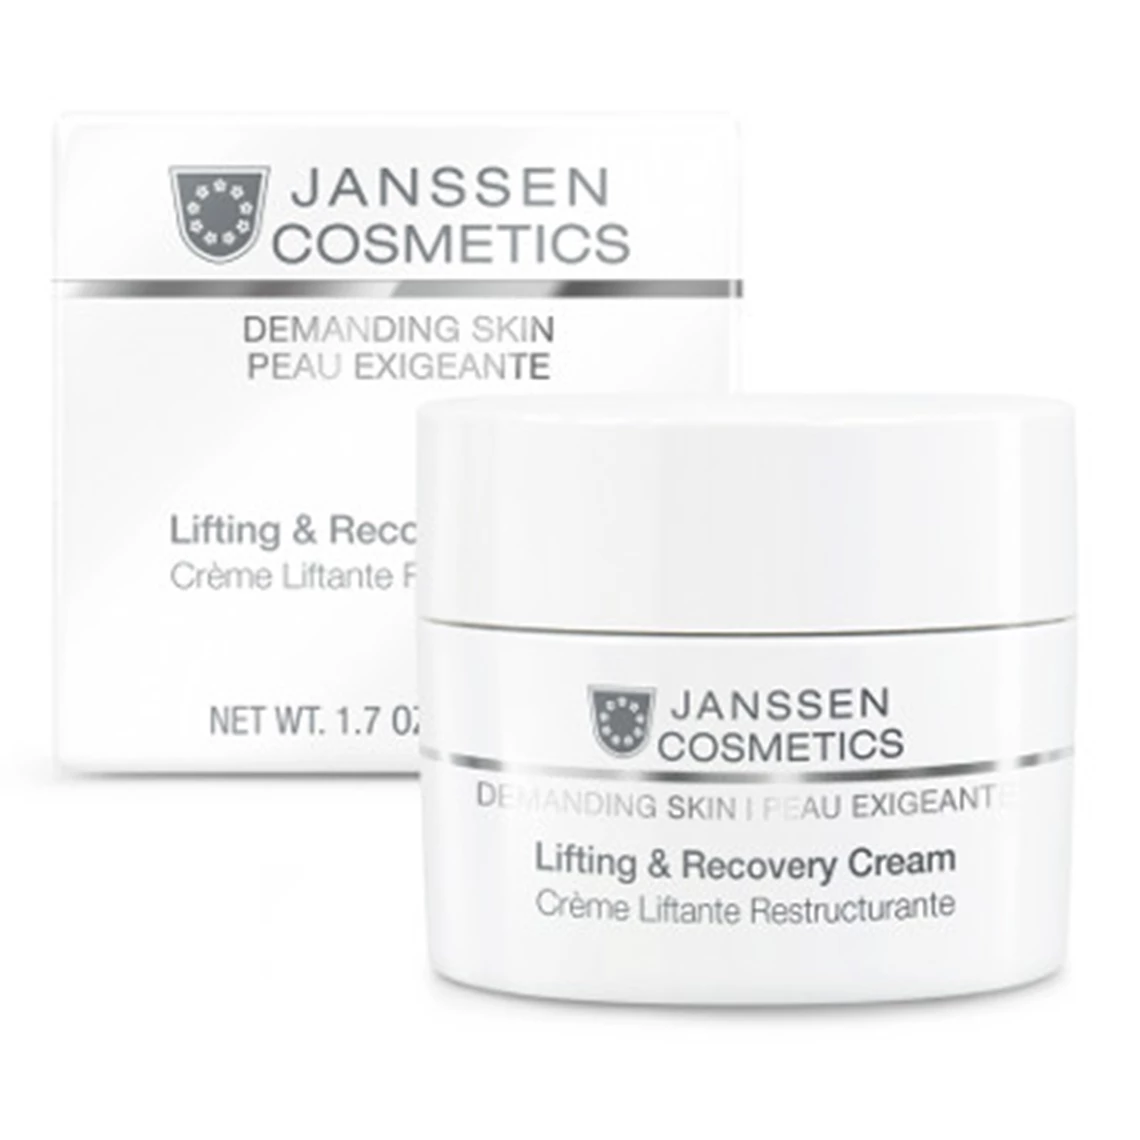 Lifting & Recovery Cream by Janssen Cosmetics